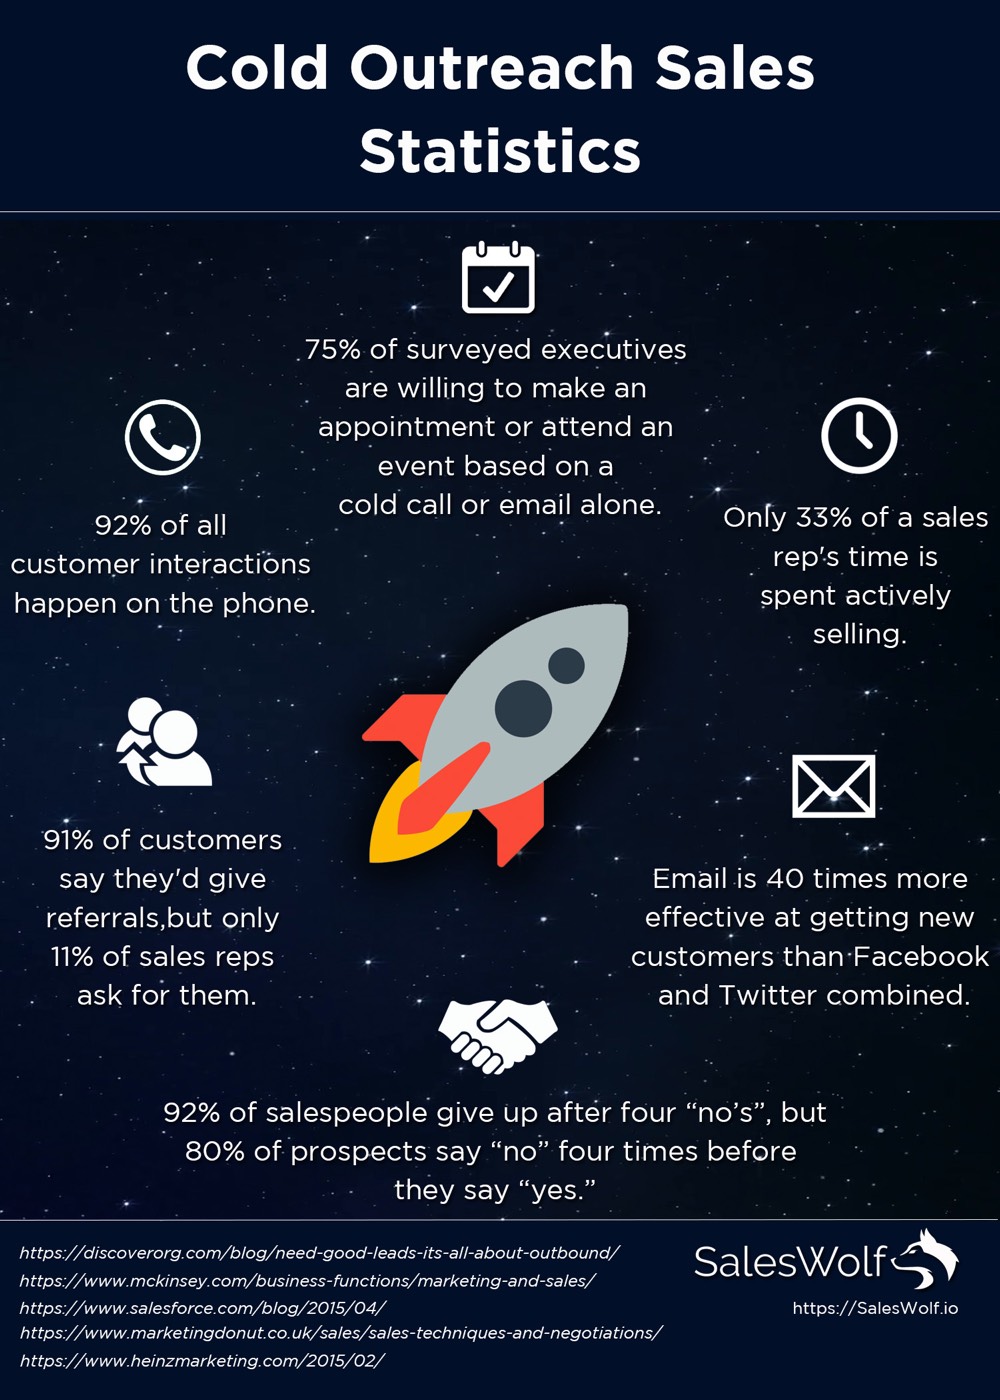 SalesWolf, sales infographic by Michael Phillips